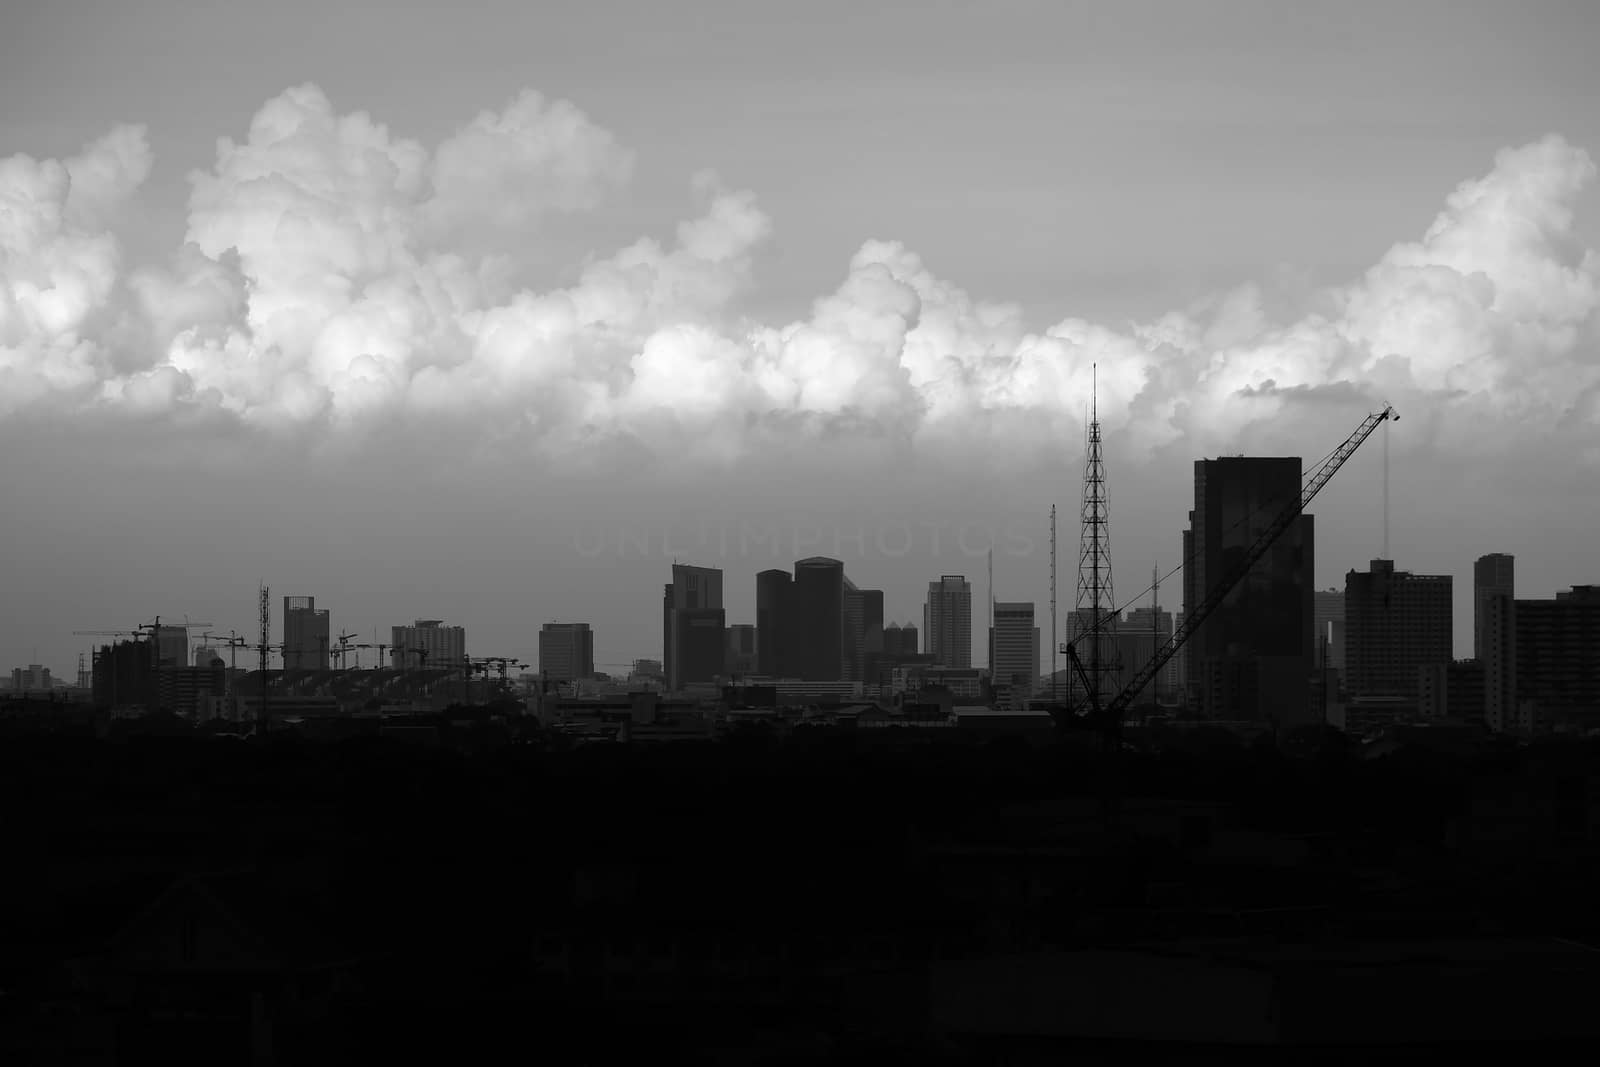 Scenery of Bangkok Cityscape, The Capital of Thailand in Black and White Style. by mesamong